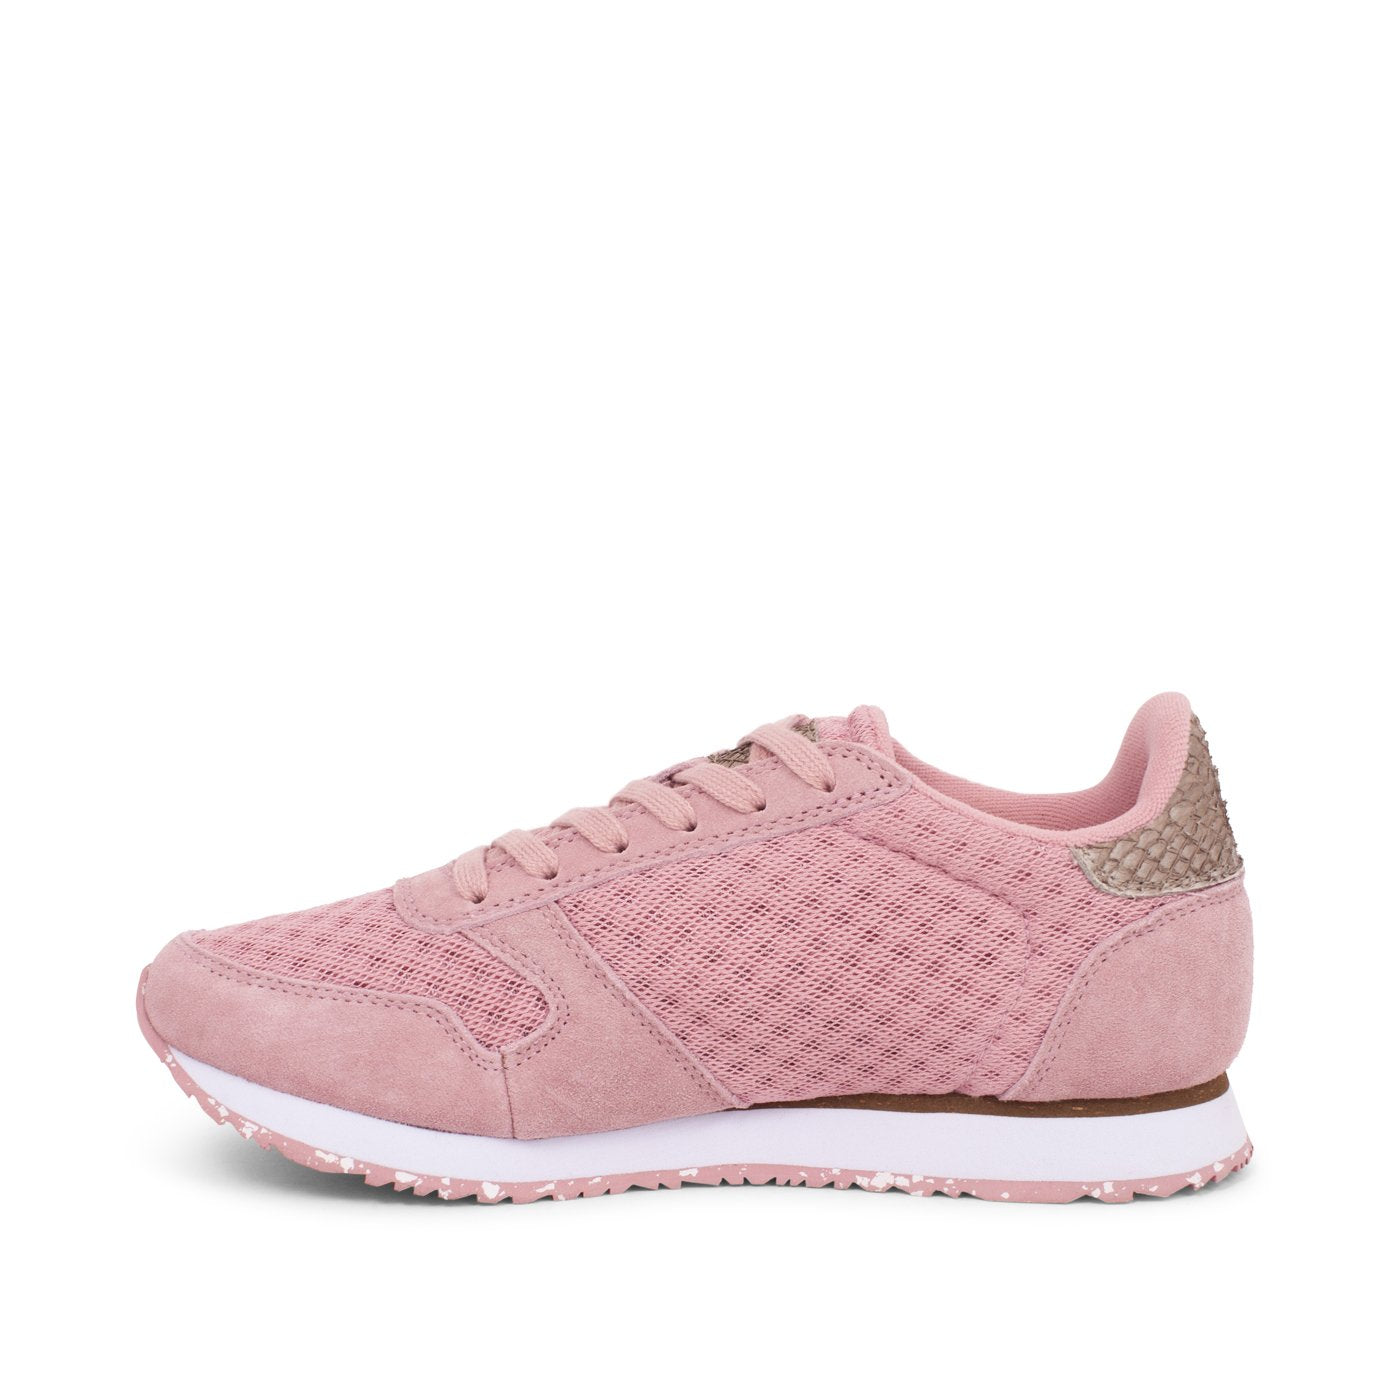 WODEN YDUN SUEDE MESH II - SOFT PINK - Collective Shoes 